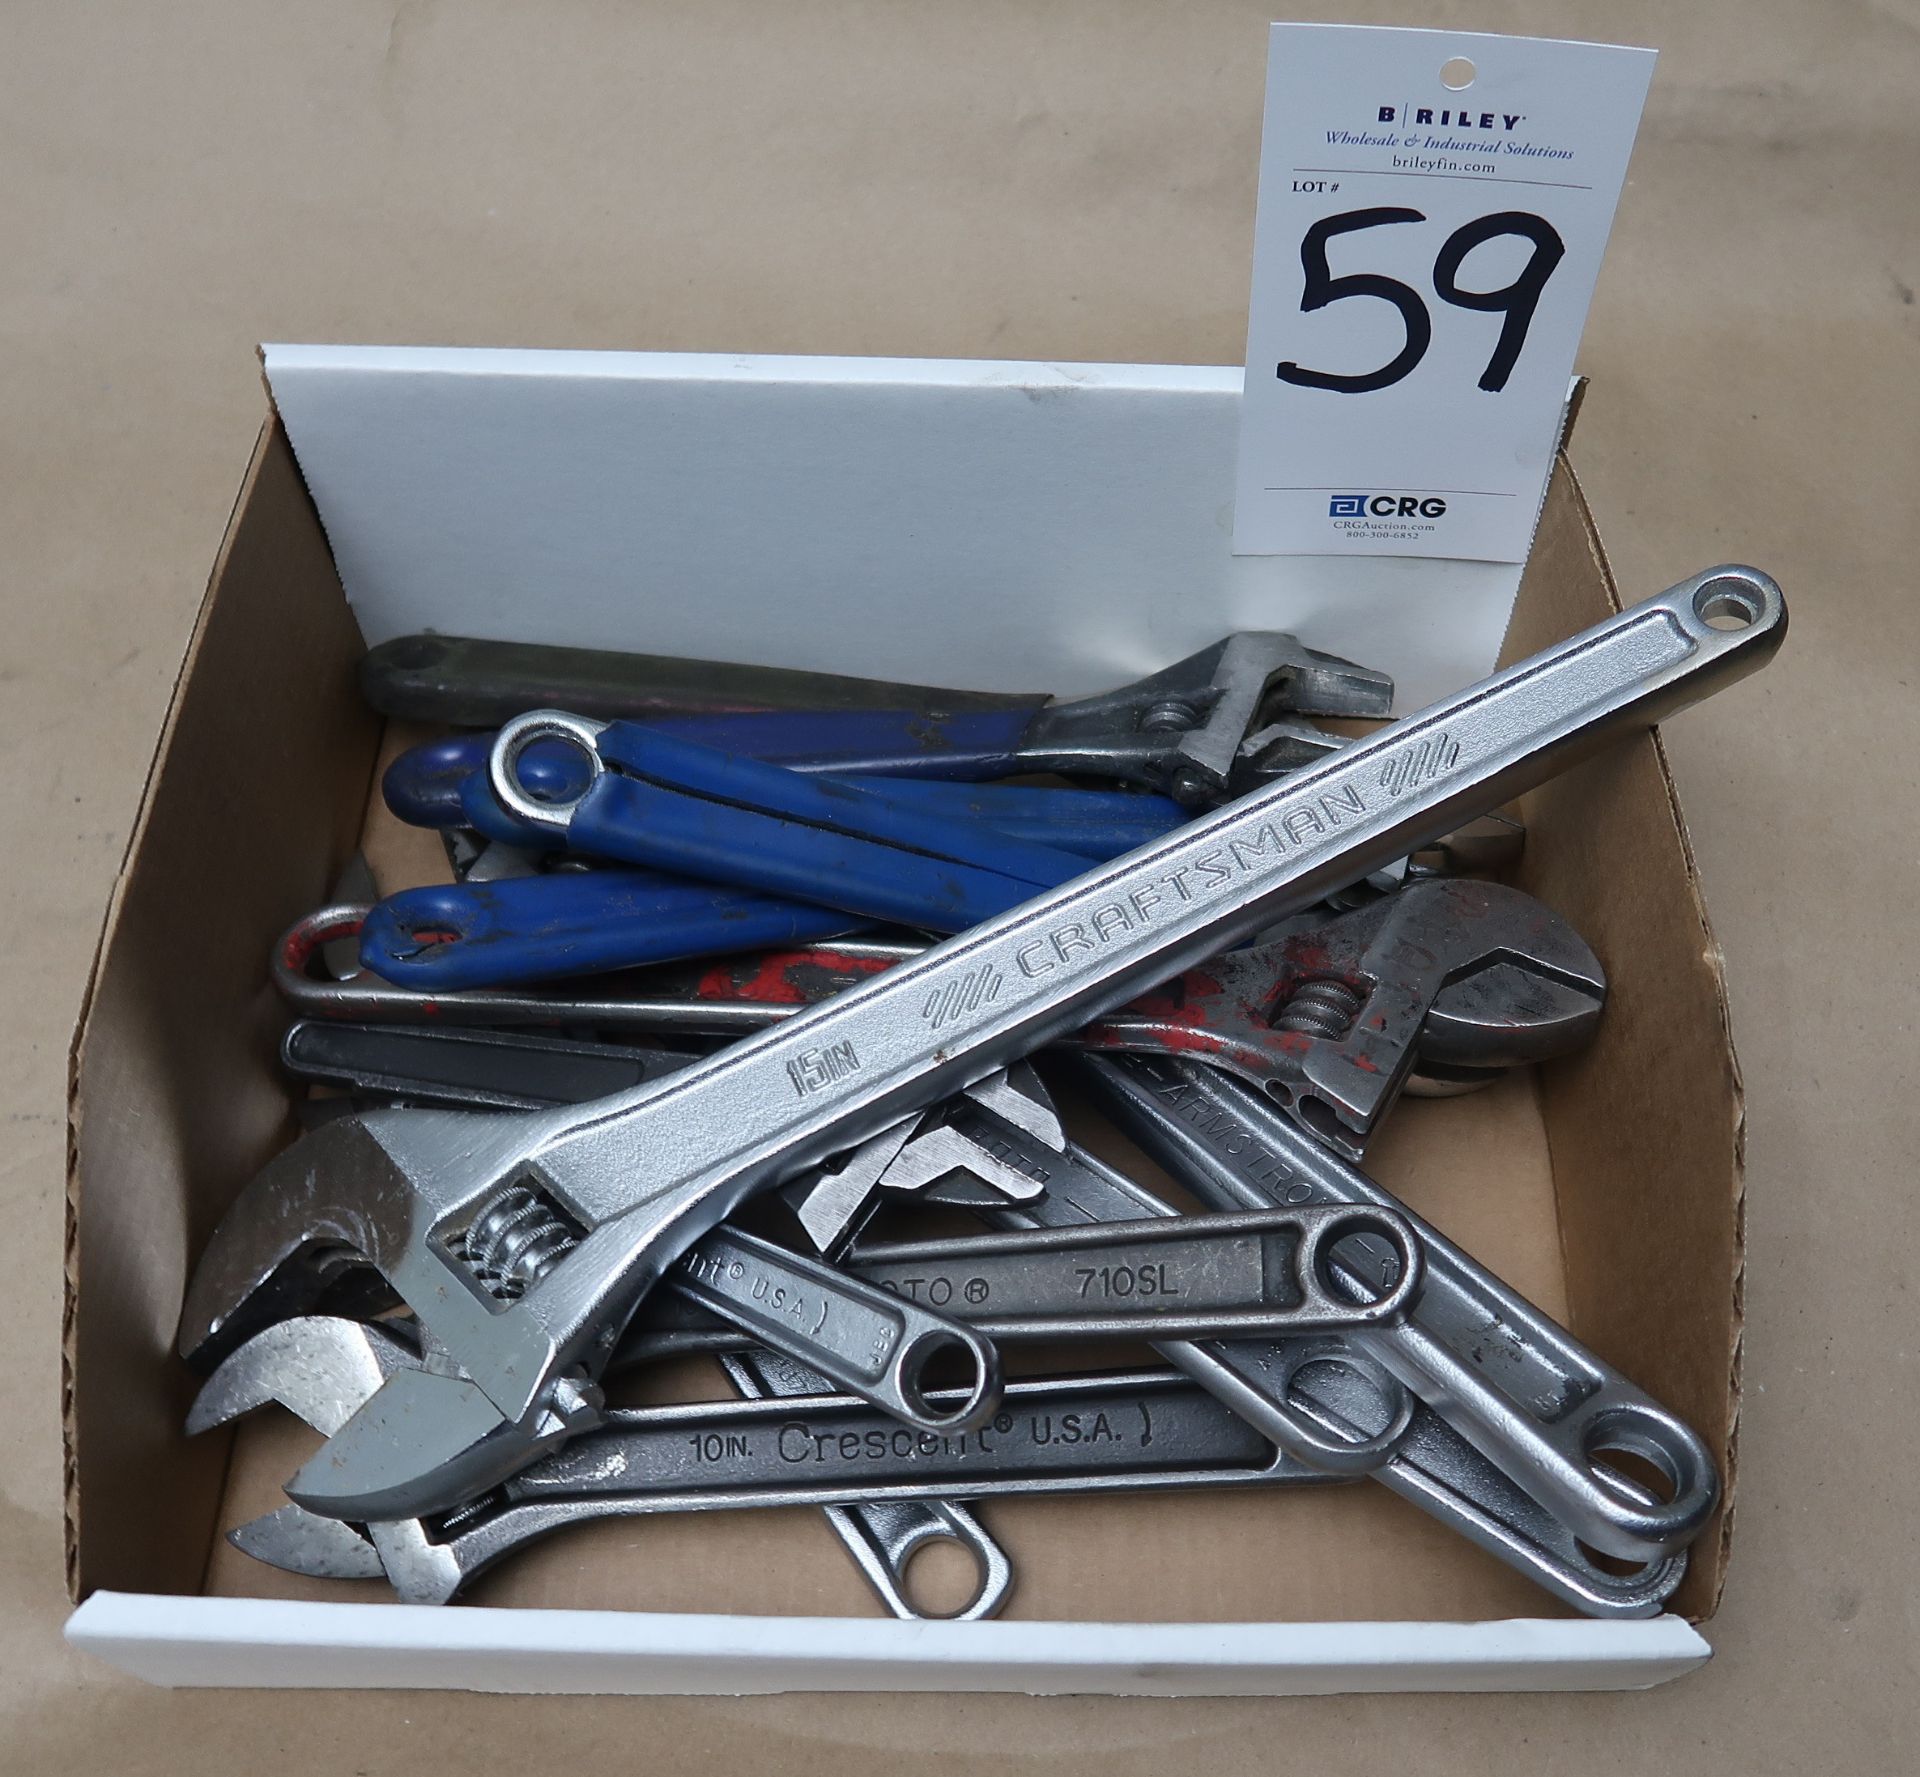 Large assortment of adjustable wrenches